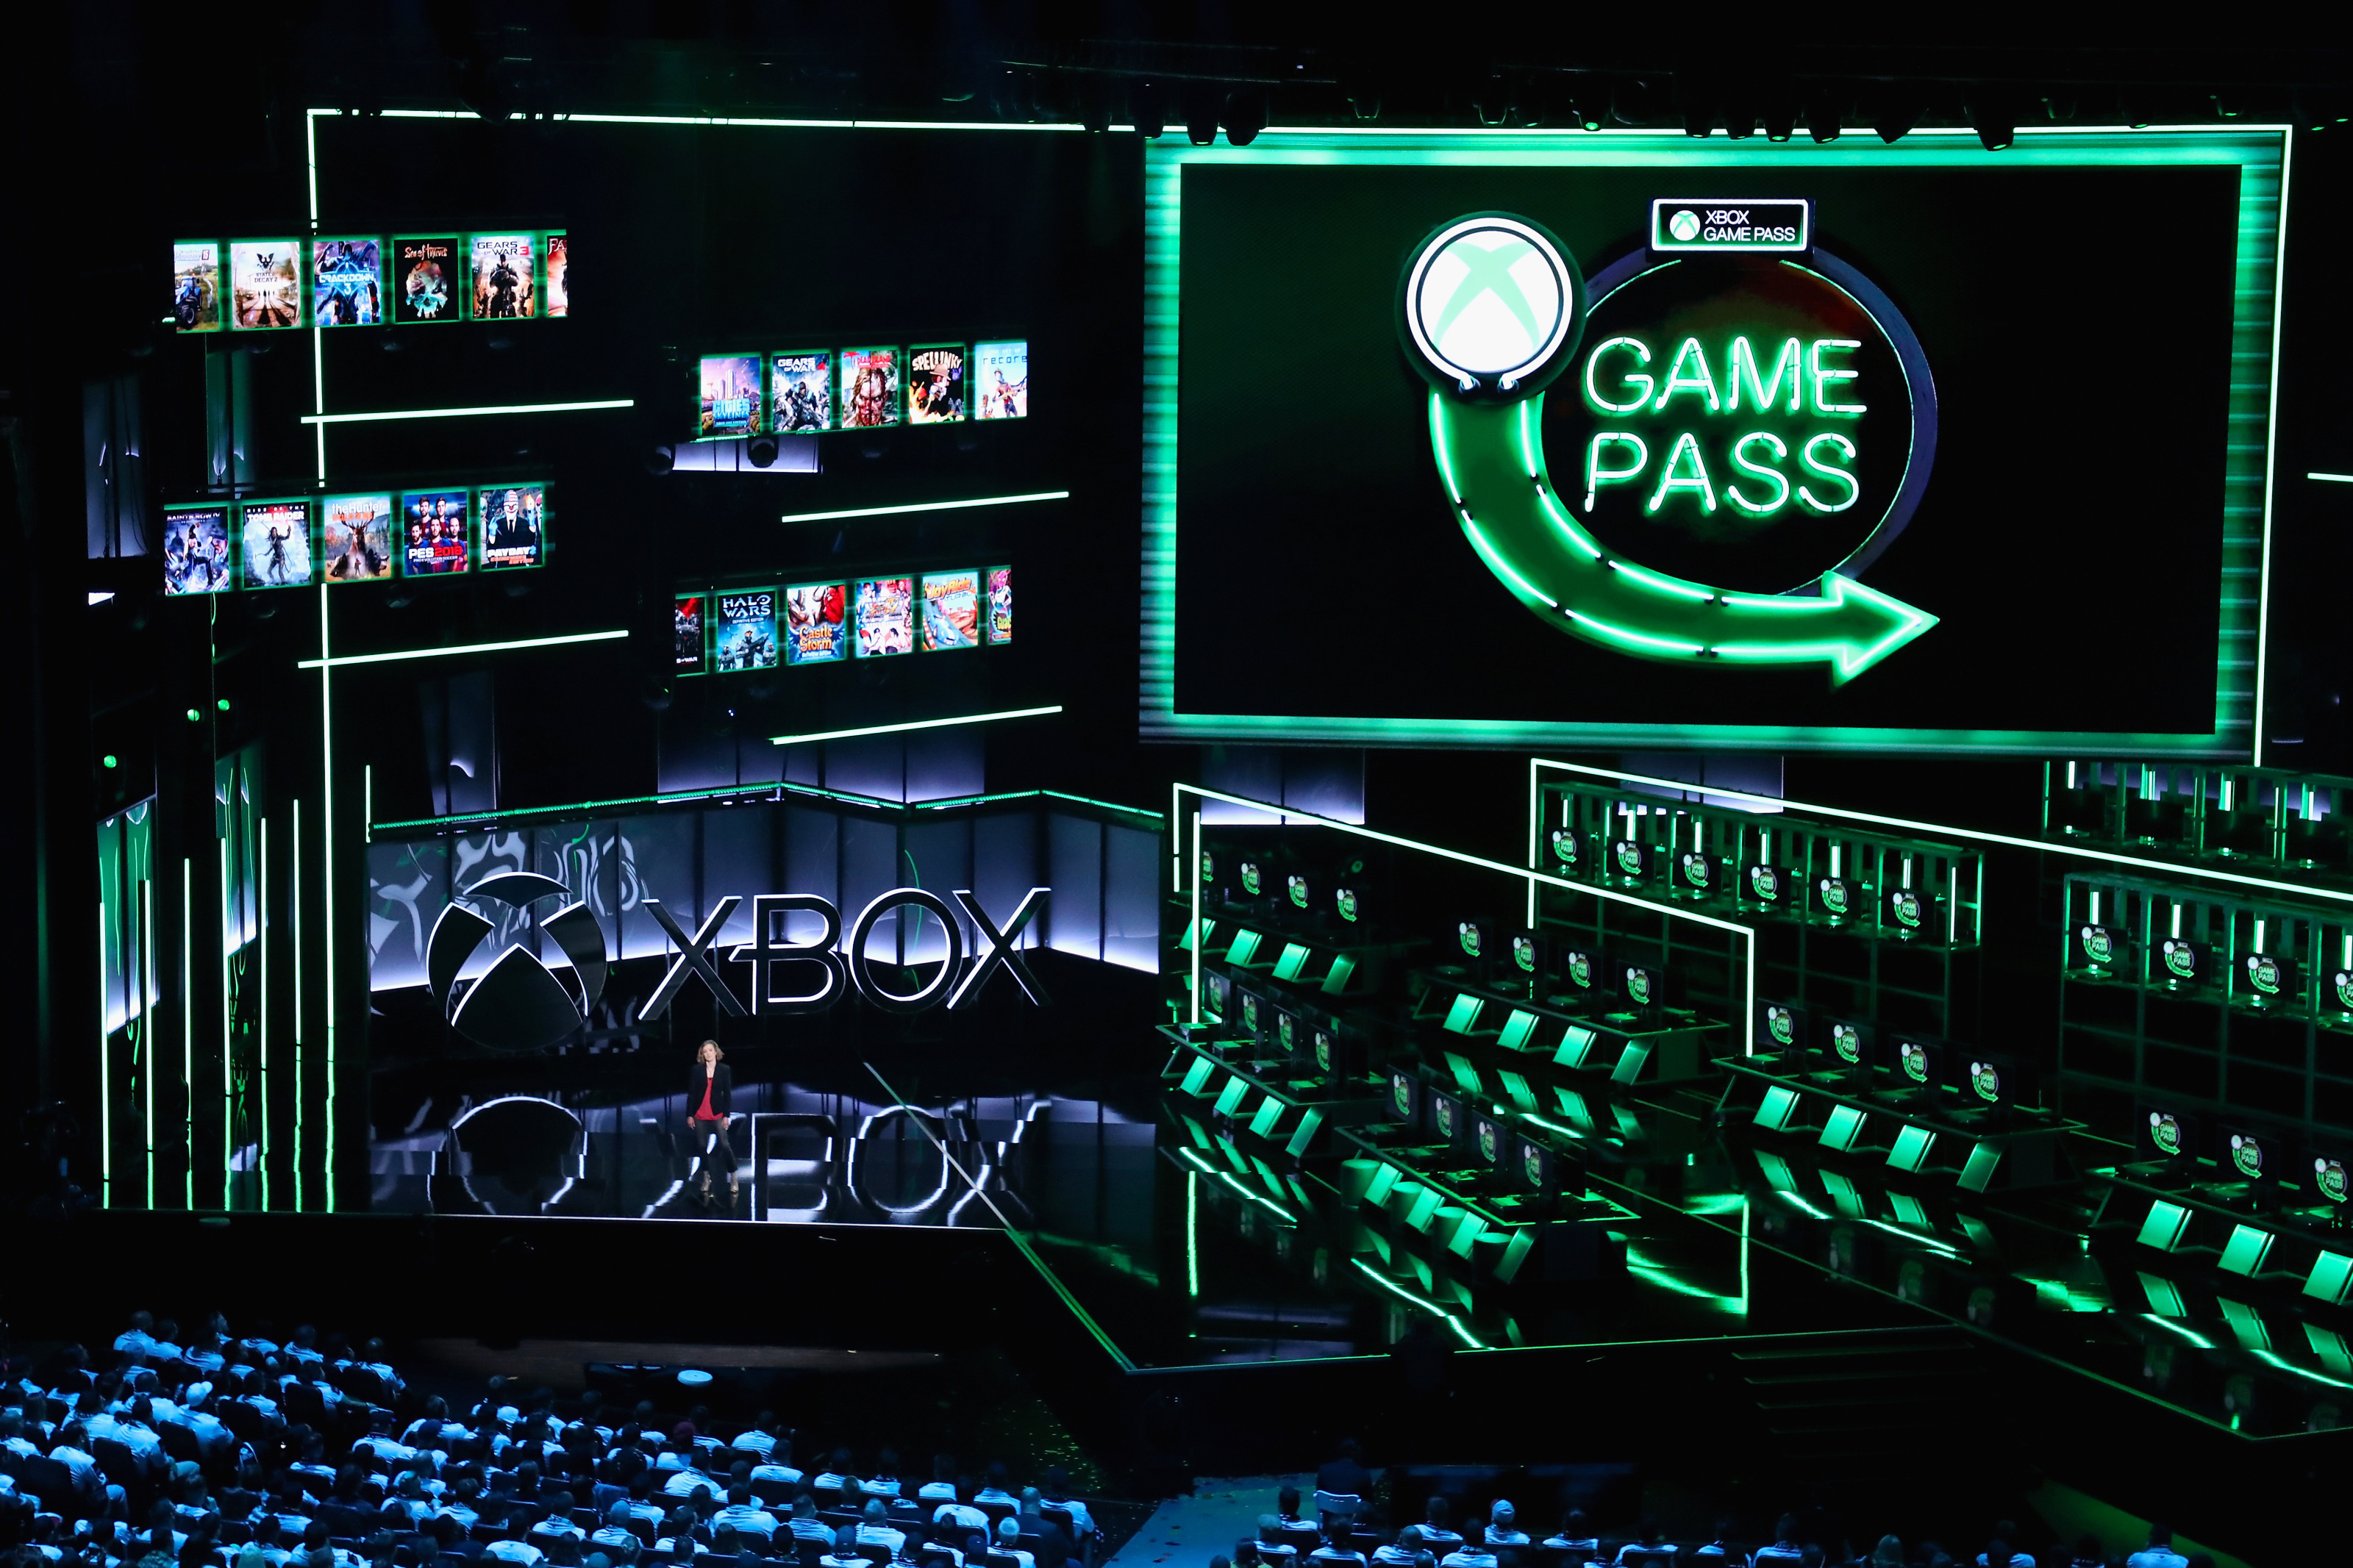 Seven Additions Coming to Xbox Game Pass in August